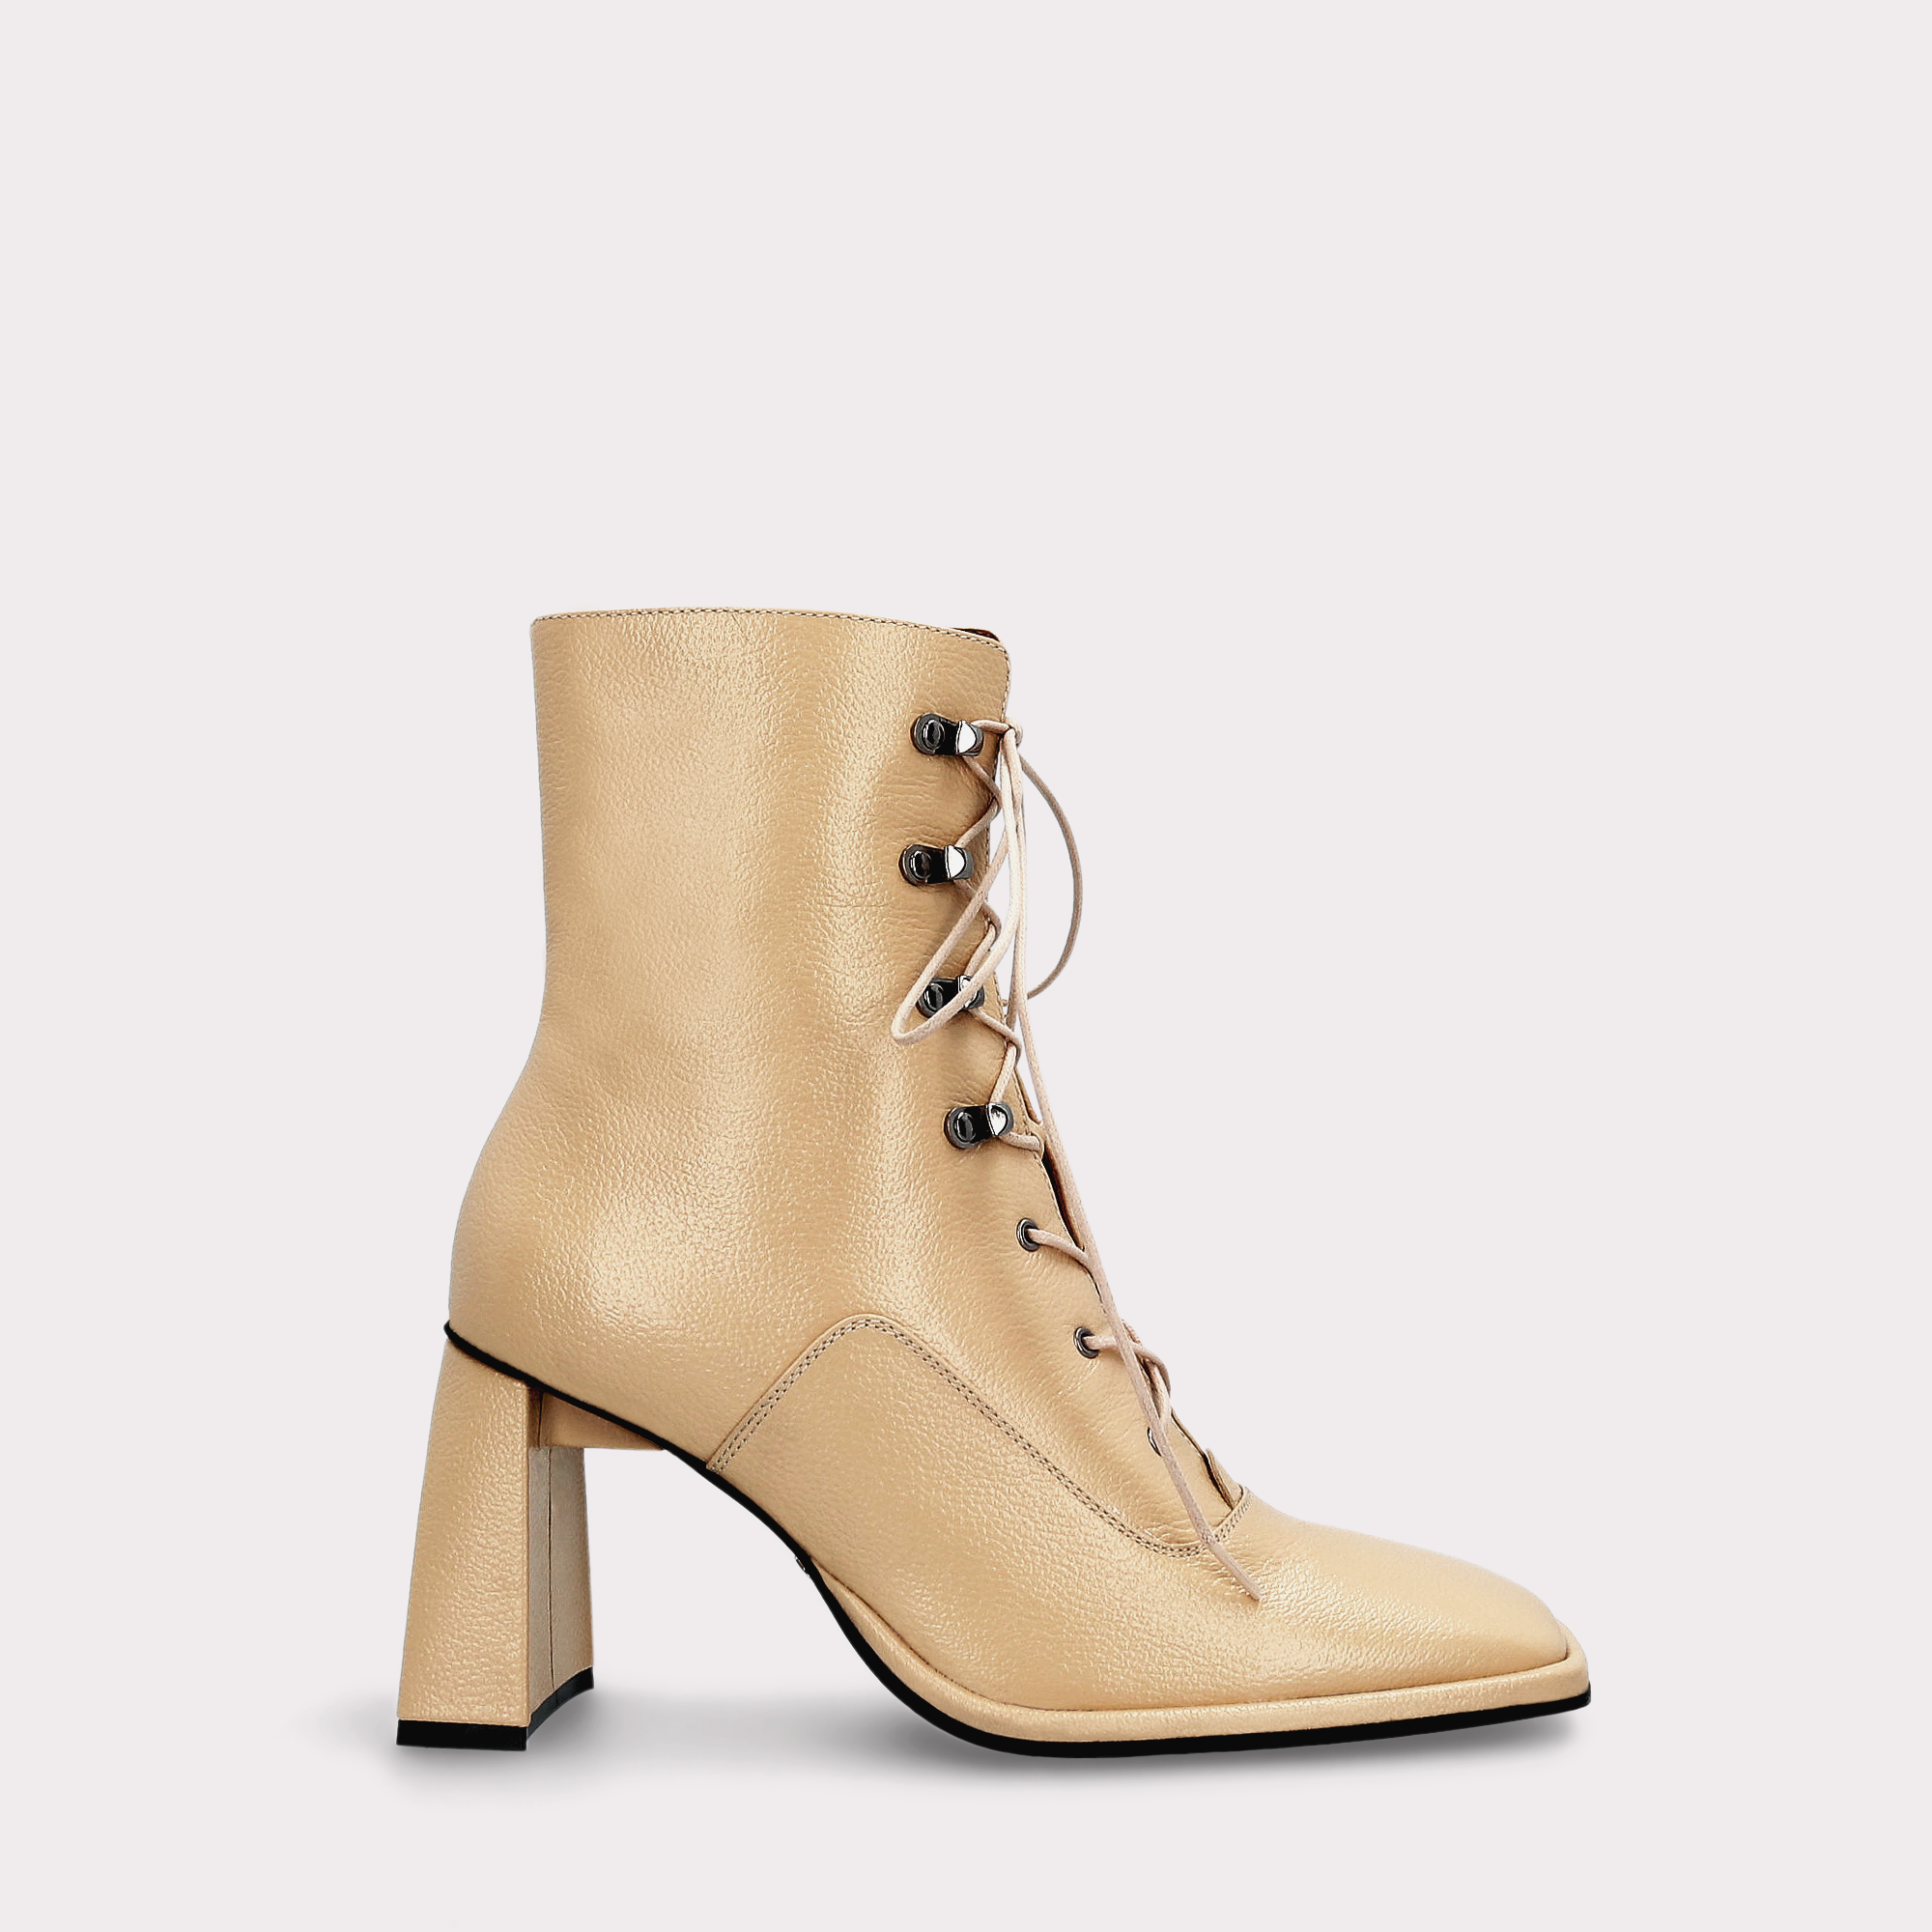 BRENTA 02 YELLOW GRAIN LEATHER ANKLE BOOTS